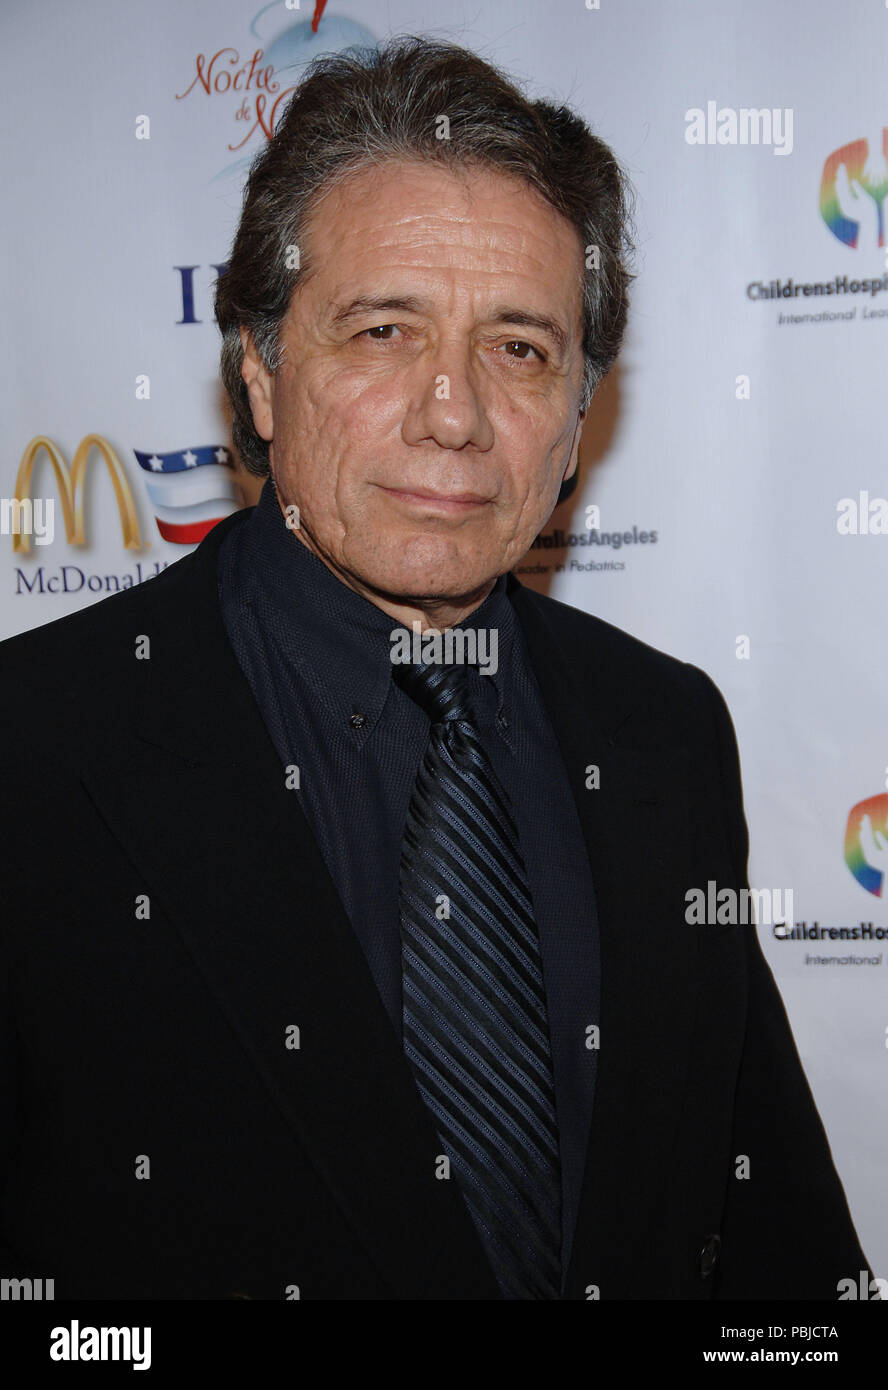 Edward James Olmos  arriving at the NOCHE DE NINOS GALA honoring Johnny Depp at the Beverly Hilton In Los Angeles.  headshot eye contact OlmosEdwardJames96 Red Carpet Event, Vertical, USA, Film Industry, Celebrities,  Photography, Bestof, Arts Culture and Entertainment, Topix Celebrities fashion /  Vertical, Best of, Event in Hollywood Life - California,  Red Carpet and backstage, USA, Film Industry, Celebrities,  movie celebrities, TV celebrities, Music celebrities, Photography, Bestof, Arts Culture and Entertainment,  Topix, headshot, vertical, one person,, from the year , 2006, inquiry tsun Stock Photo